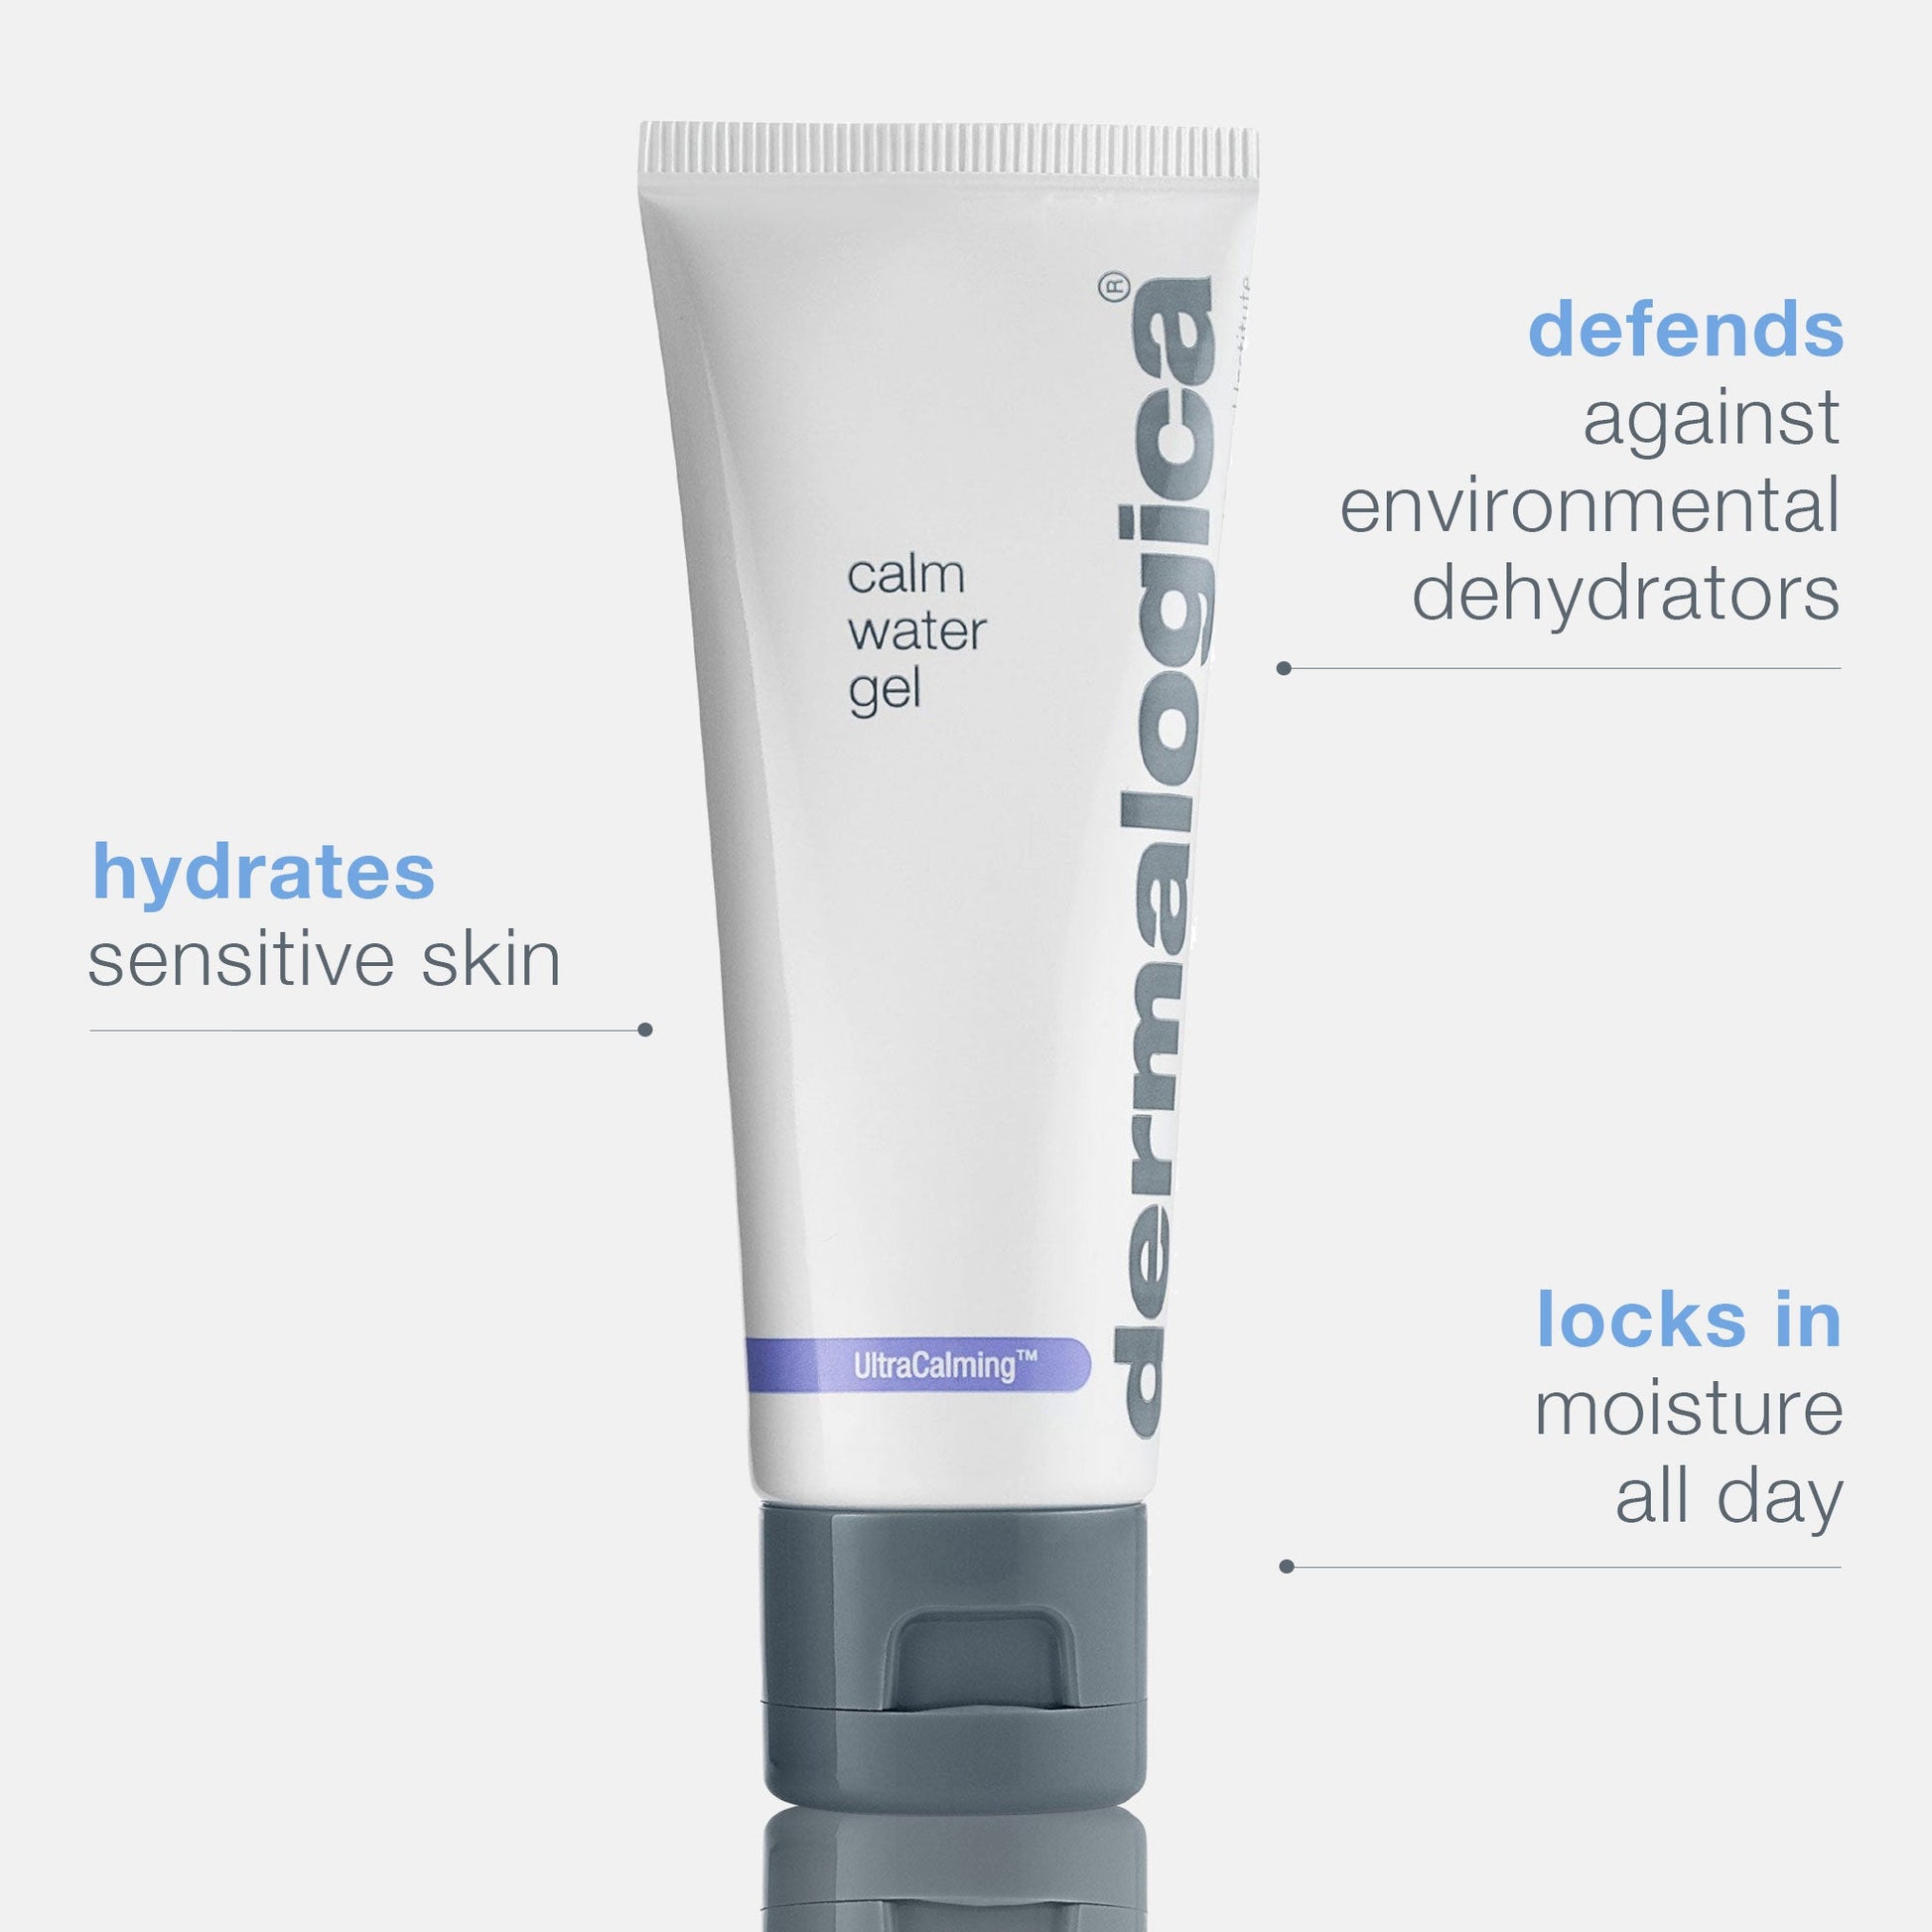 Hydrating Skin Products with Cooling Gel Formula